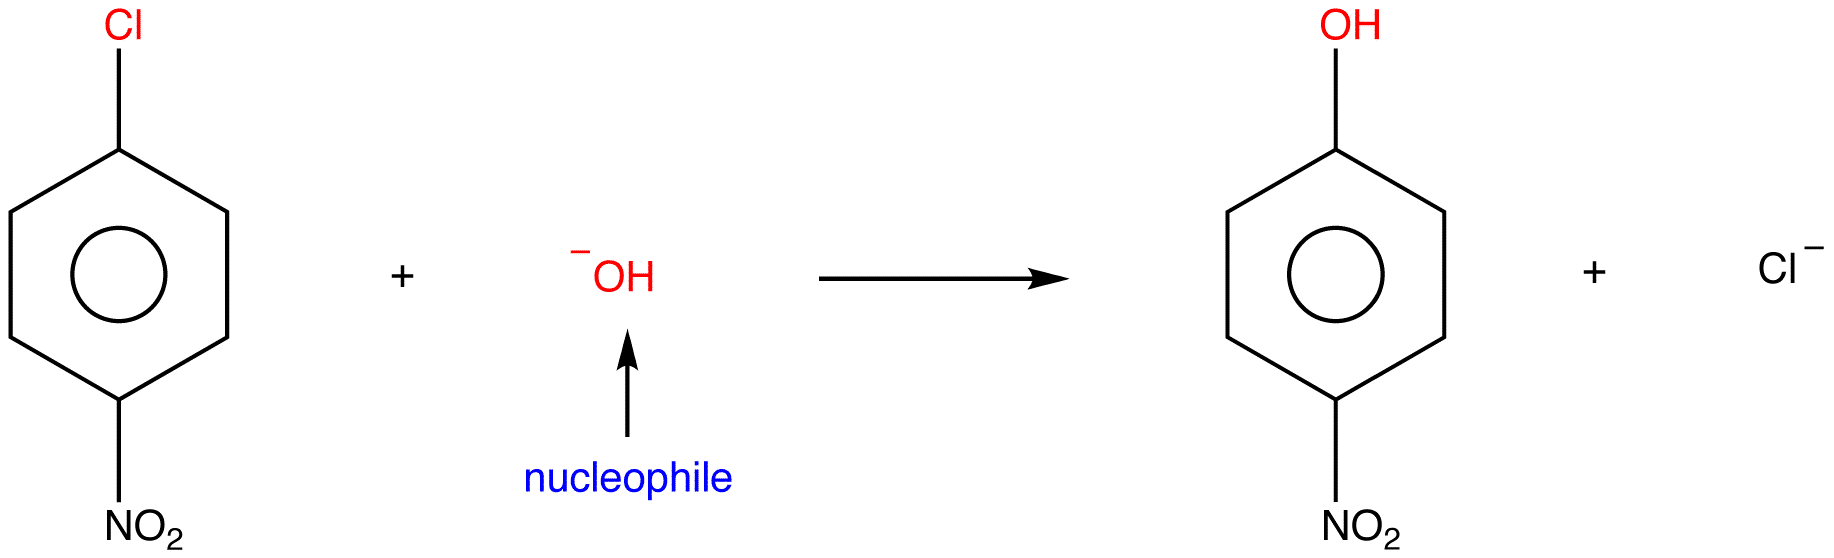 nucleophilicaromaticsubstitution4.png